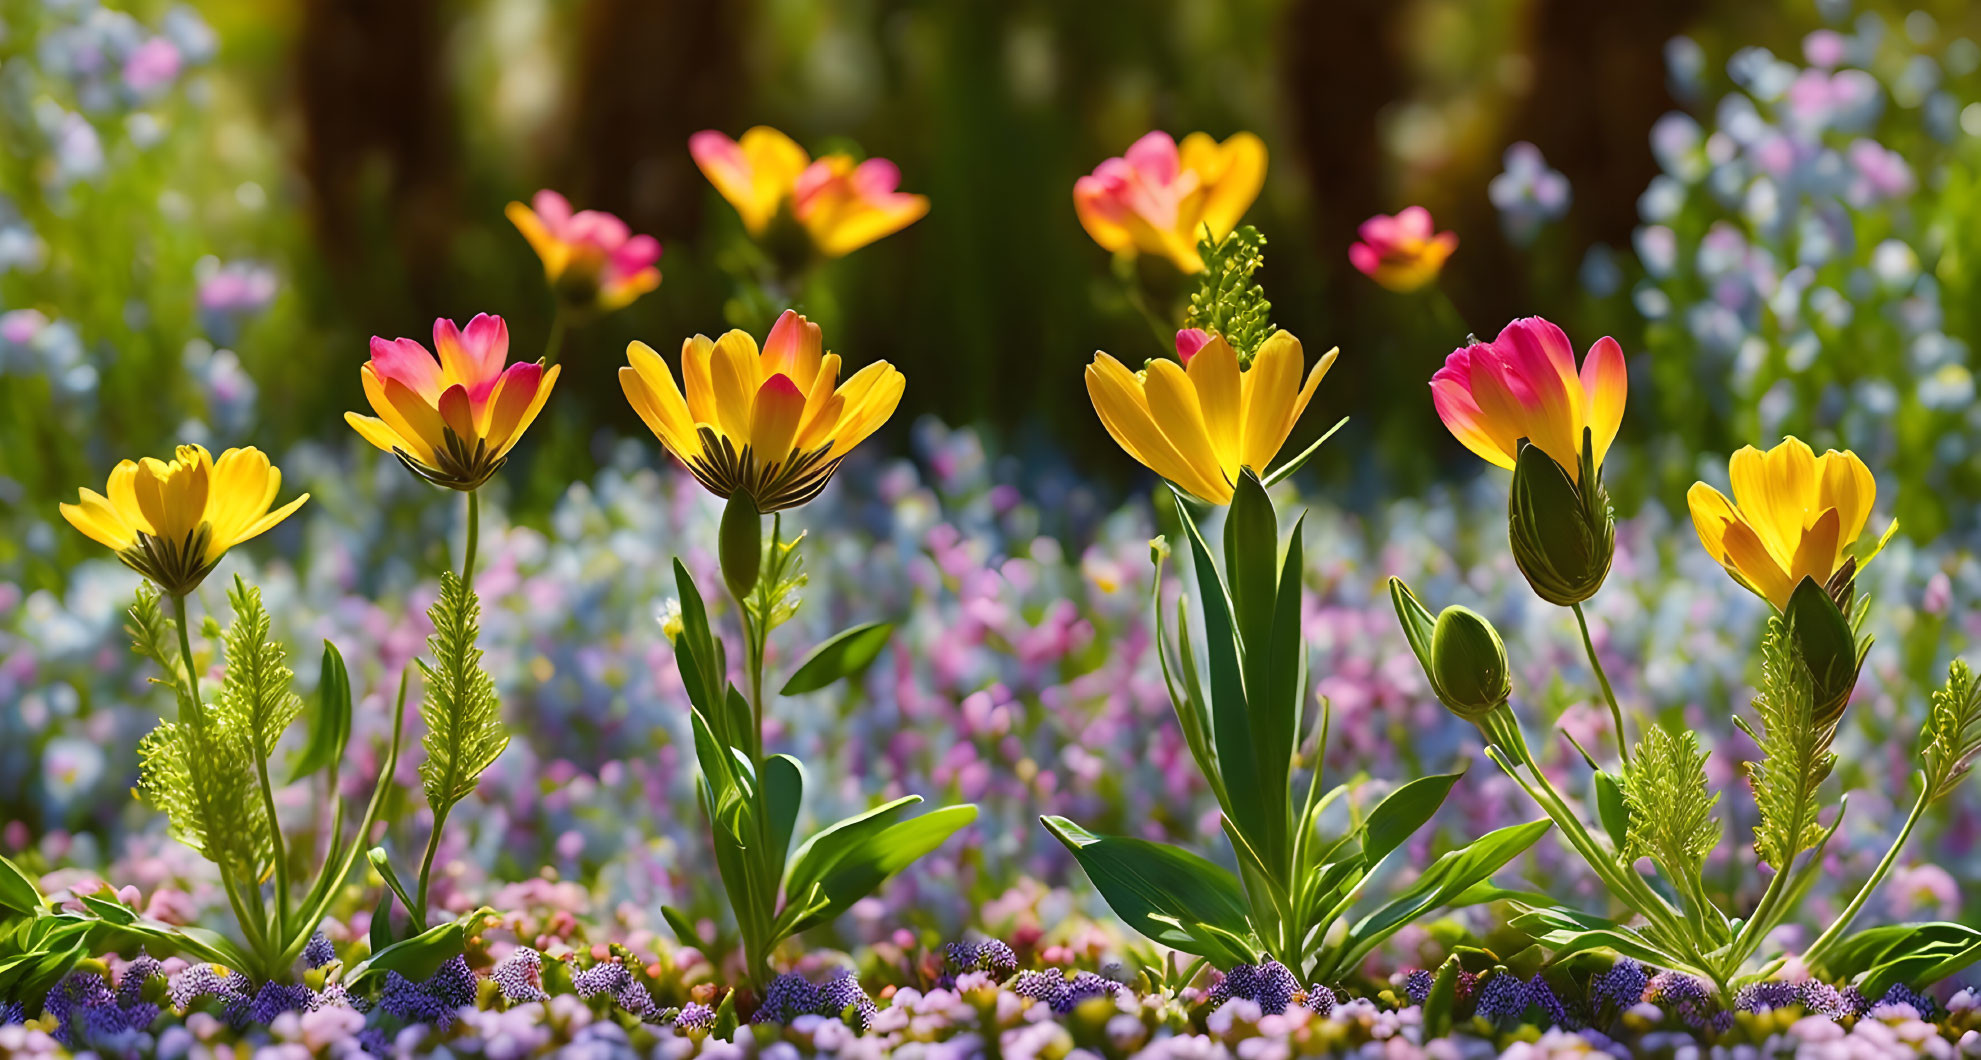 Colorful yellow and pink flowers in lush garden setting